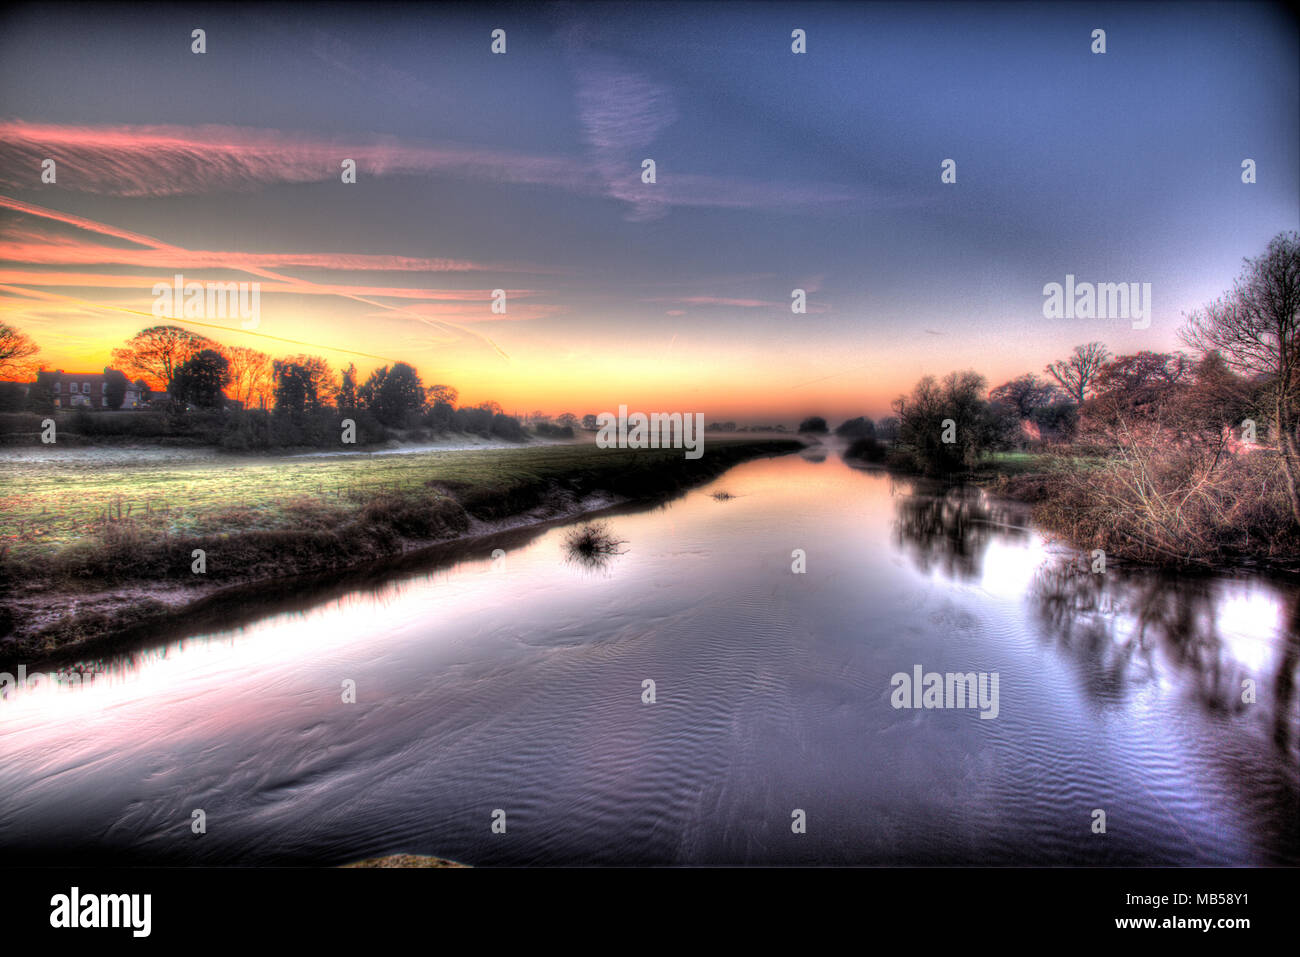 River Dee, England Wales border. Picturesque misty sunset view of the River Dee. Stock Photo